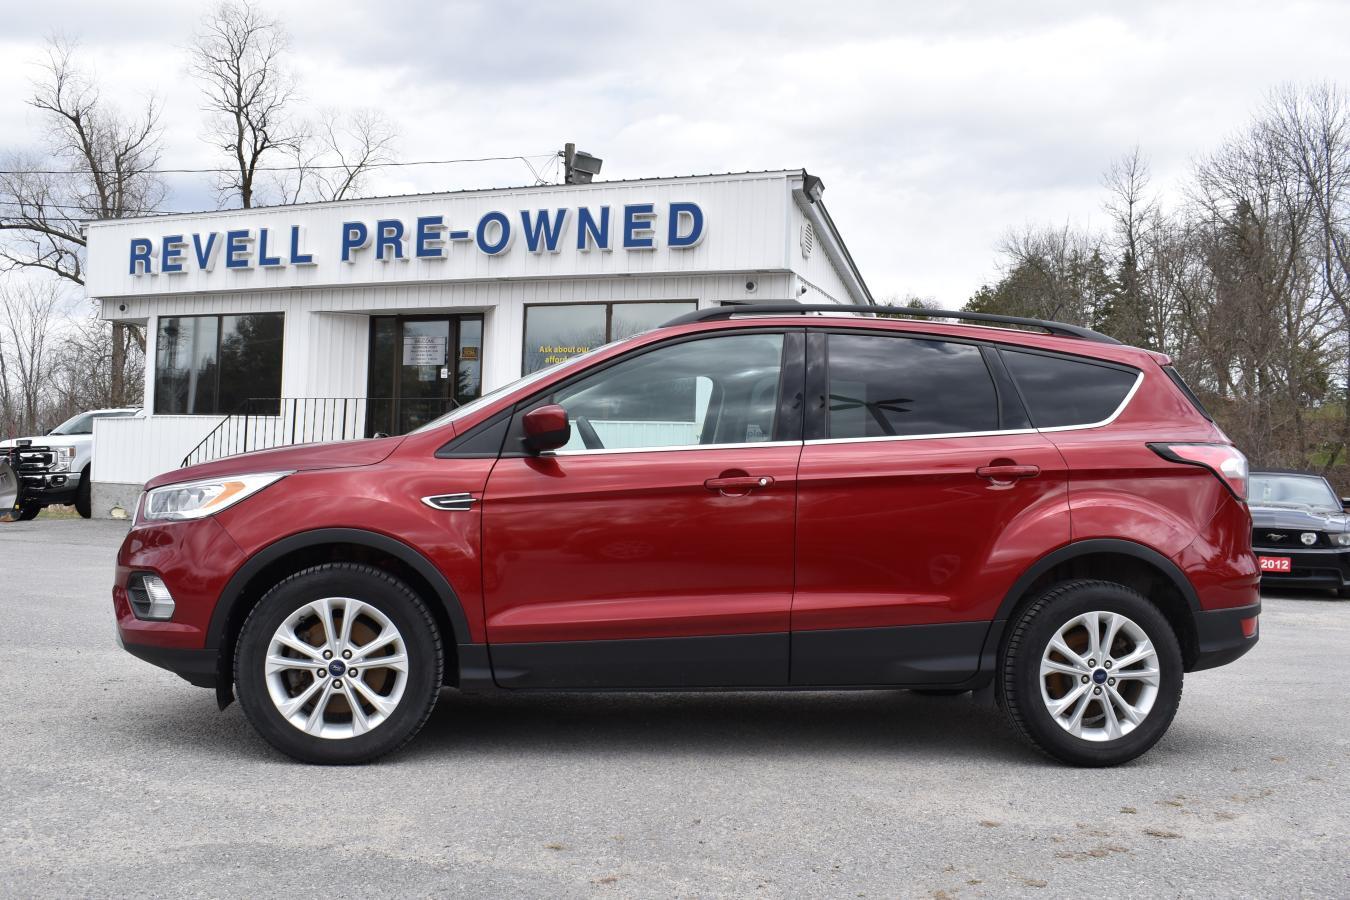 2018 Ford Escape SEL 4WD 1-OWNER 2.0L ECO NAVIGATION HEATED LEATHER